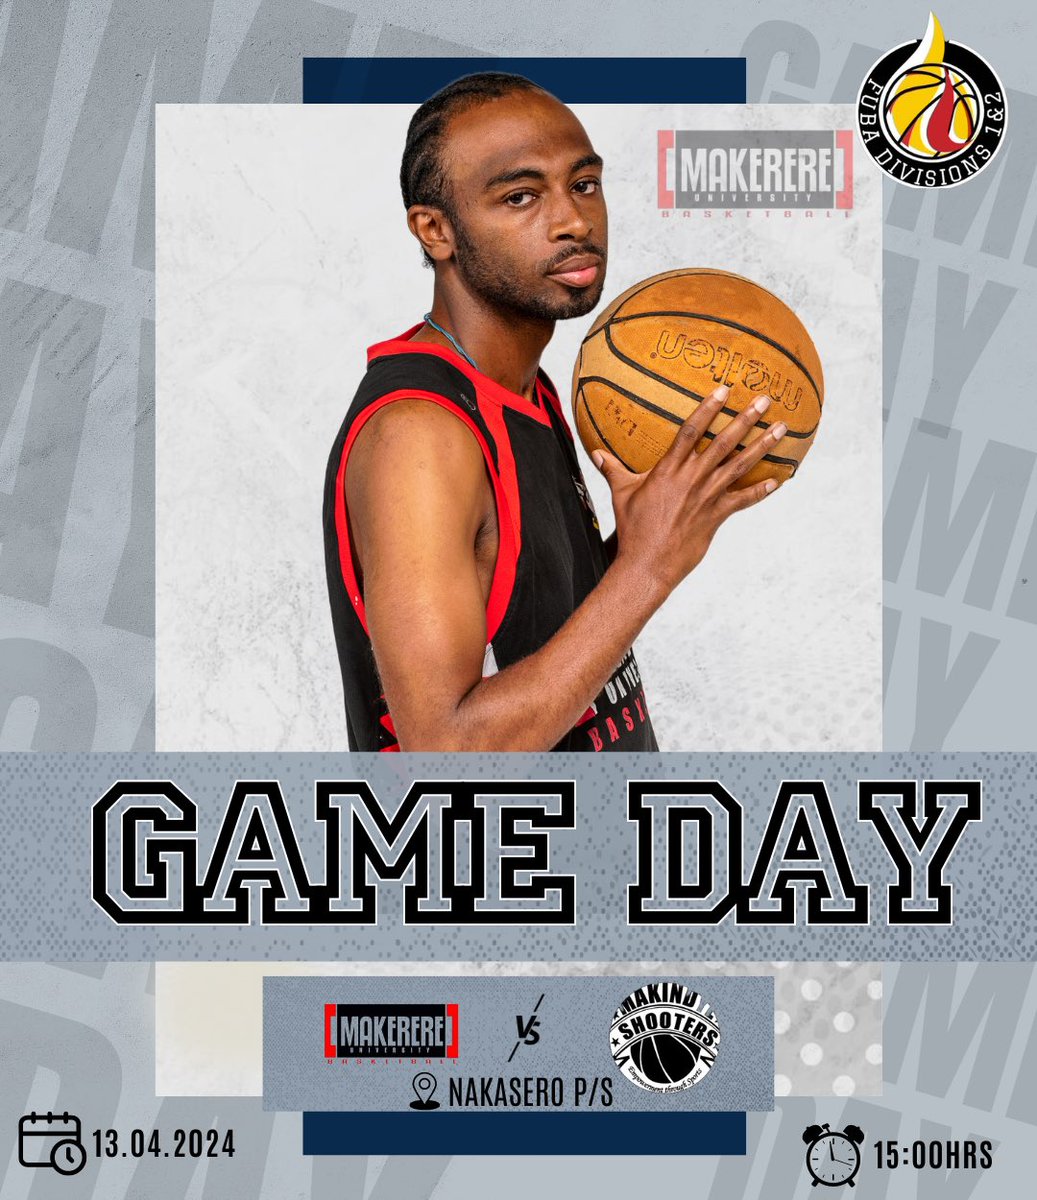 GAME DAY 🆚 Makindye Shooters 🕗 15:00 HRS 🏟 Nakasero P/S